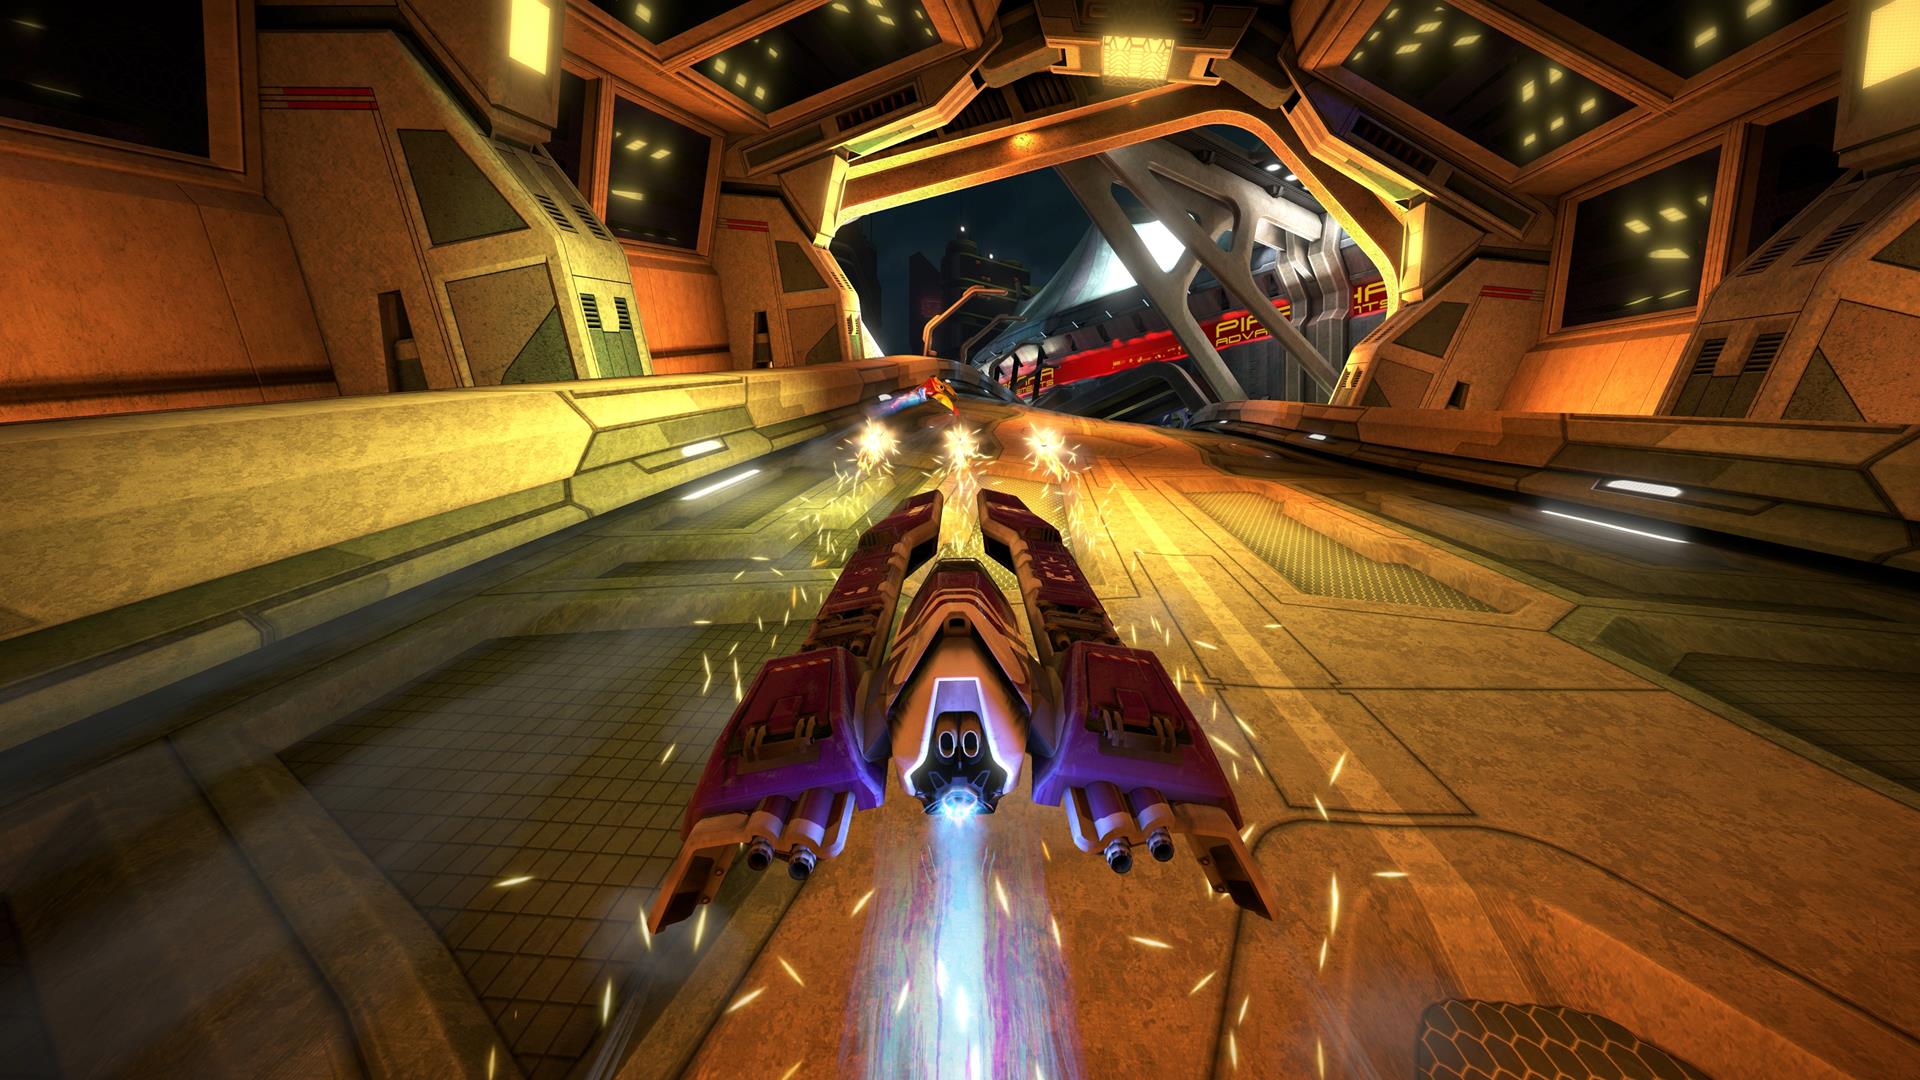 streaming Wipeout Omega Collection on PS4 - we Watch and see for yourself | VG247